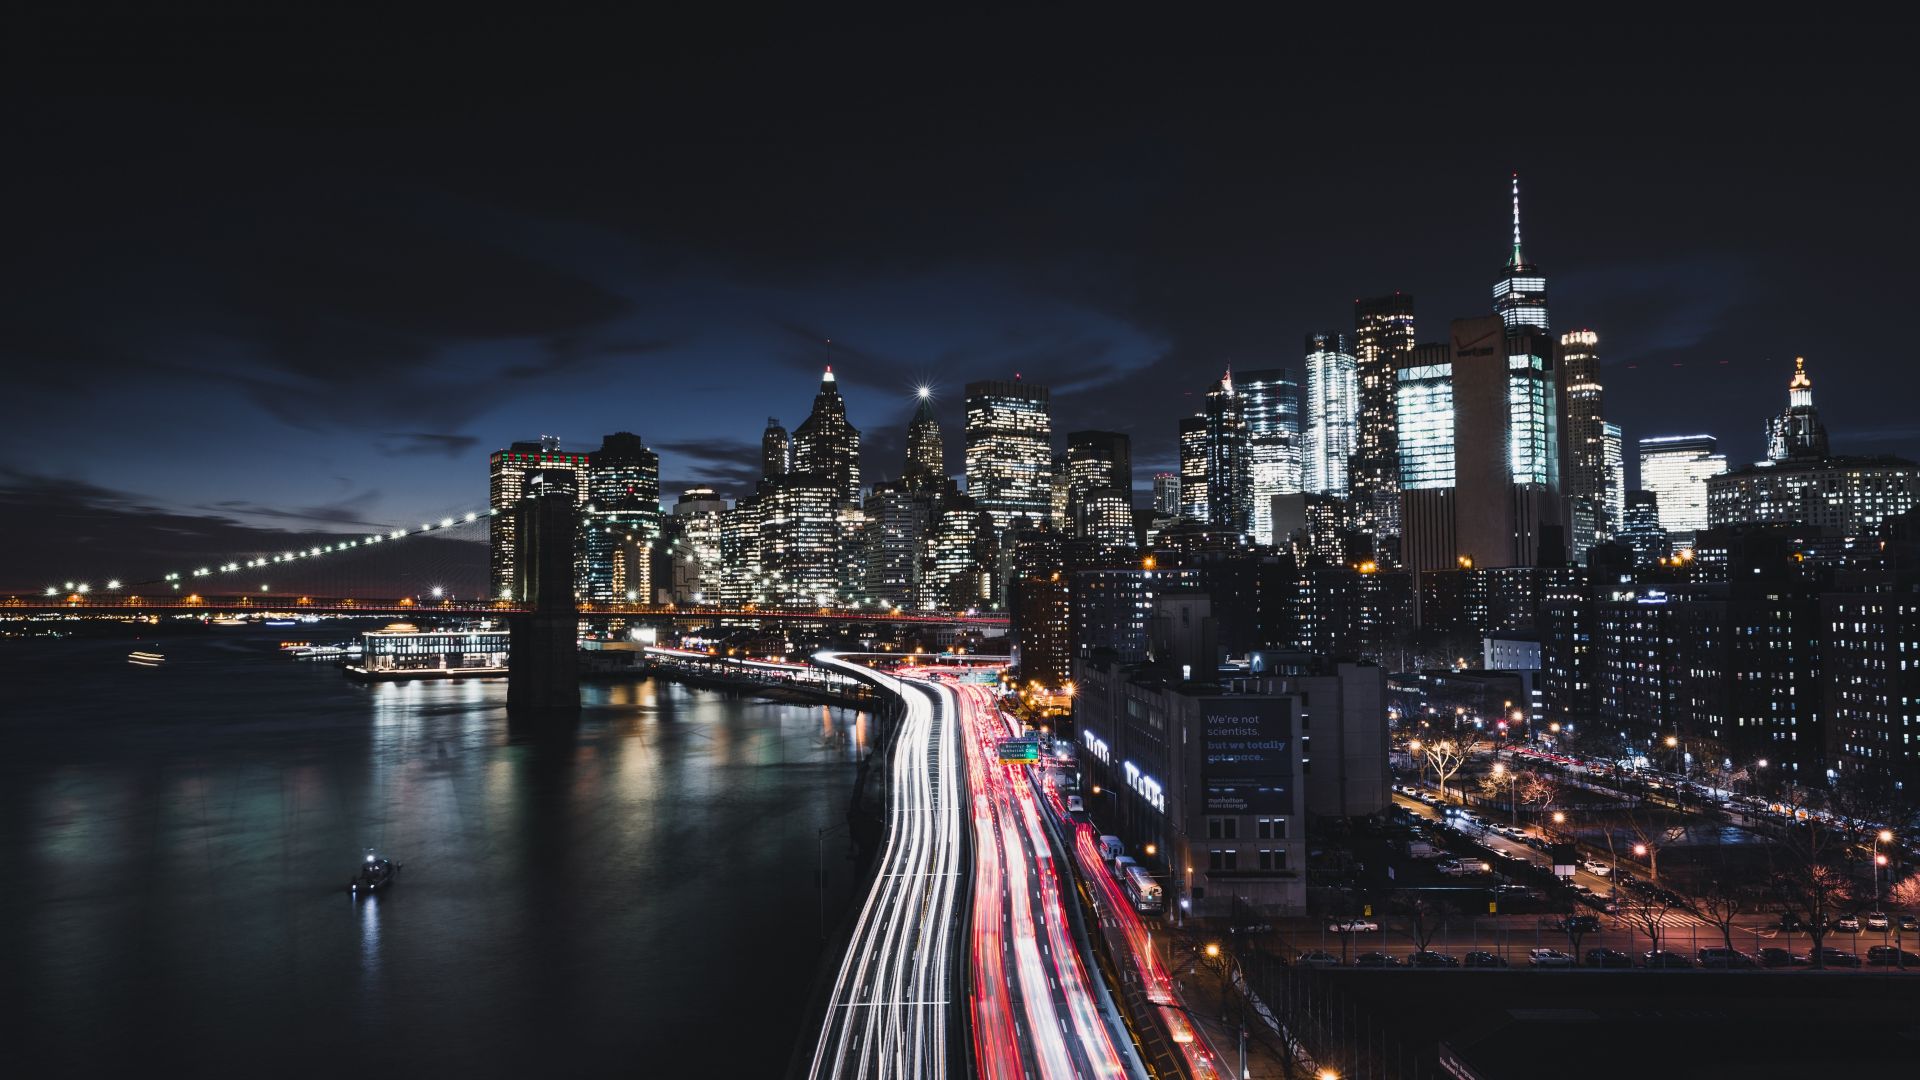 New york, city, night, road, buildings wallpaper, HD image, picture, background, 86cfdb